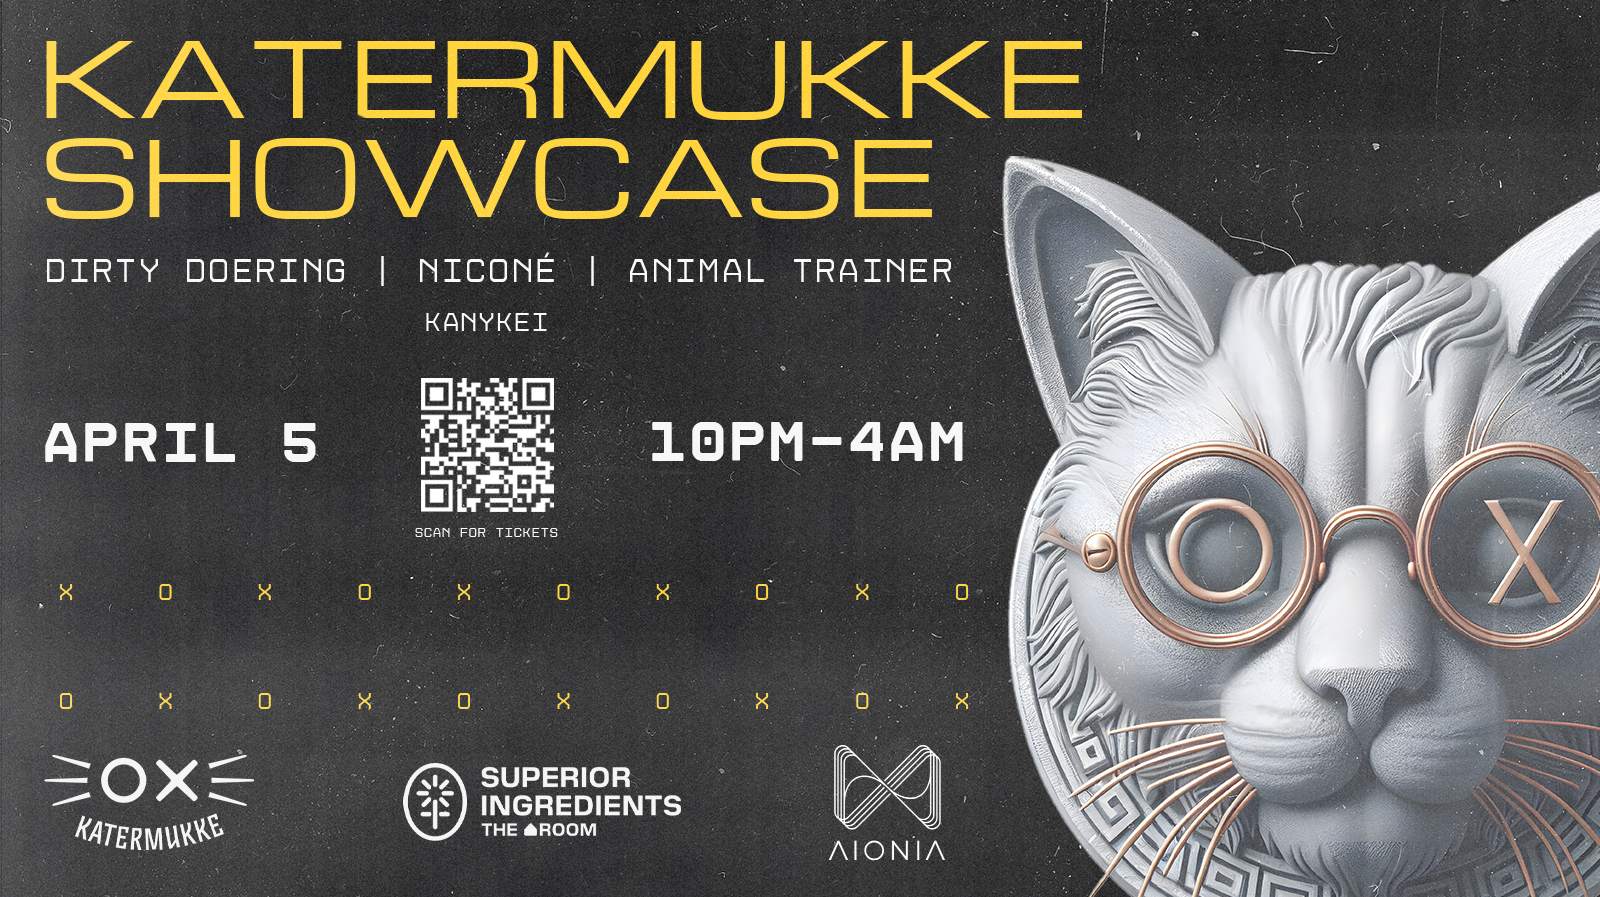 AIONIA: NYC Katermukke Showcase with Dirty Doering, Nicone, Animal Trainer **TICKETS ===>> DICE** - フライヤー表